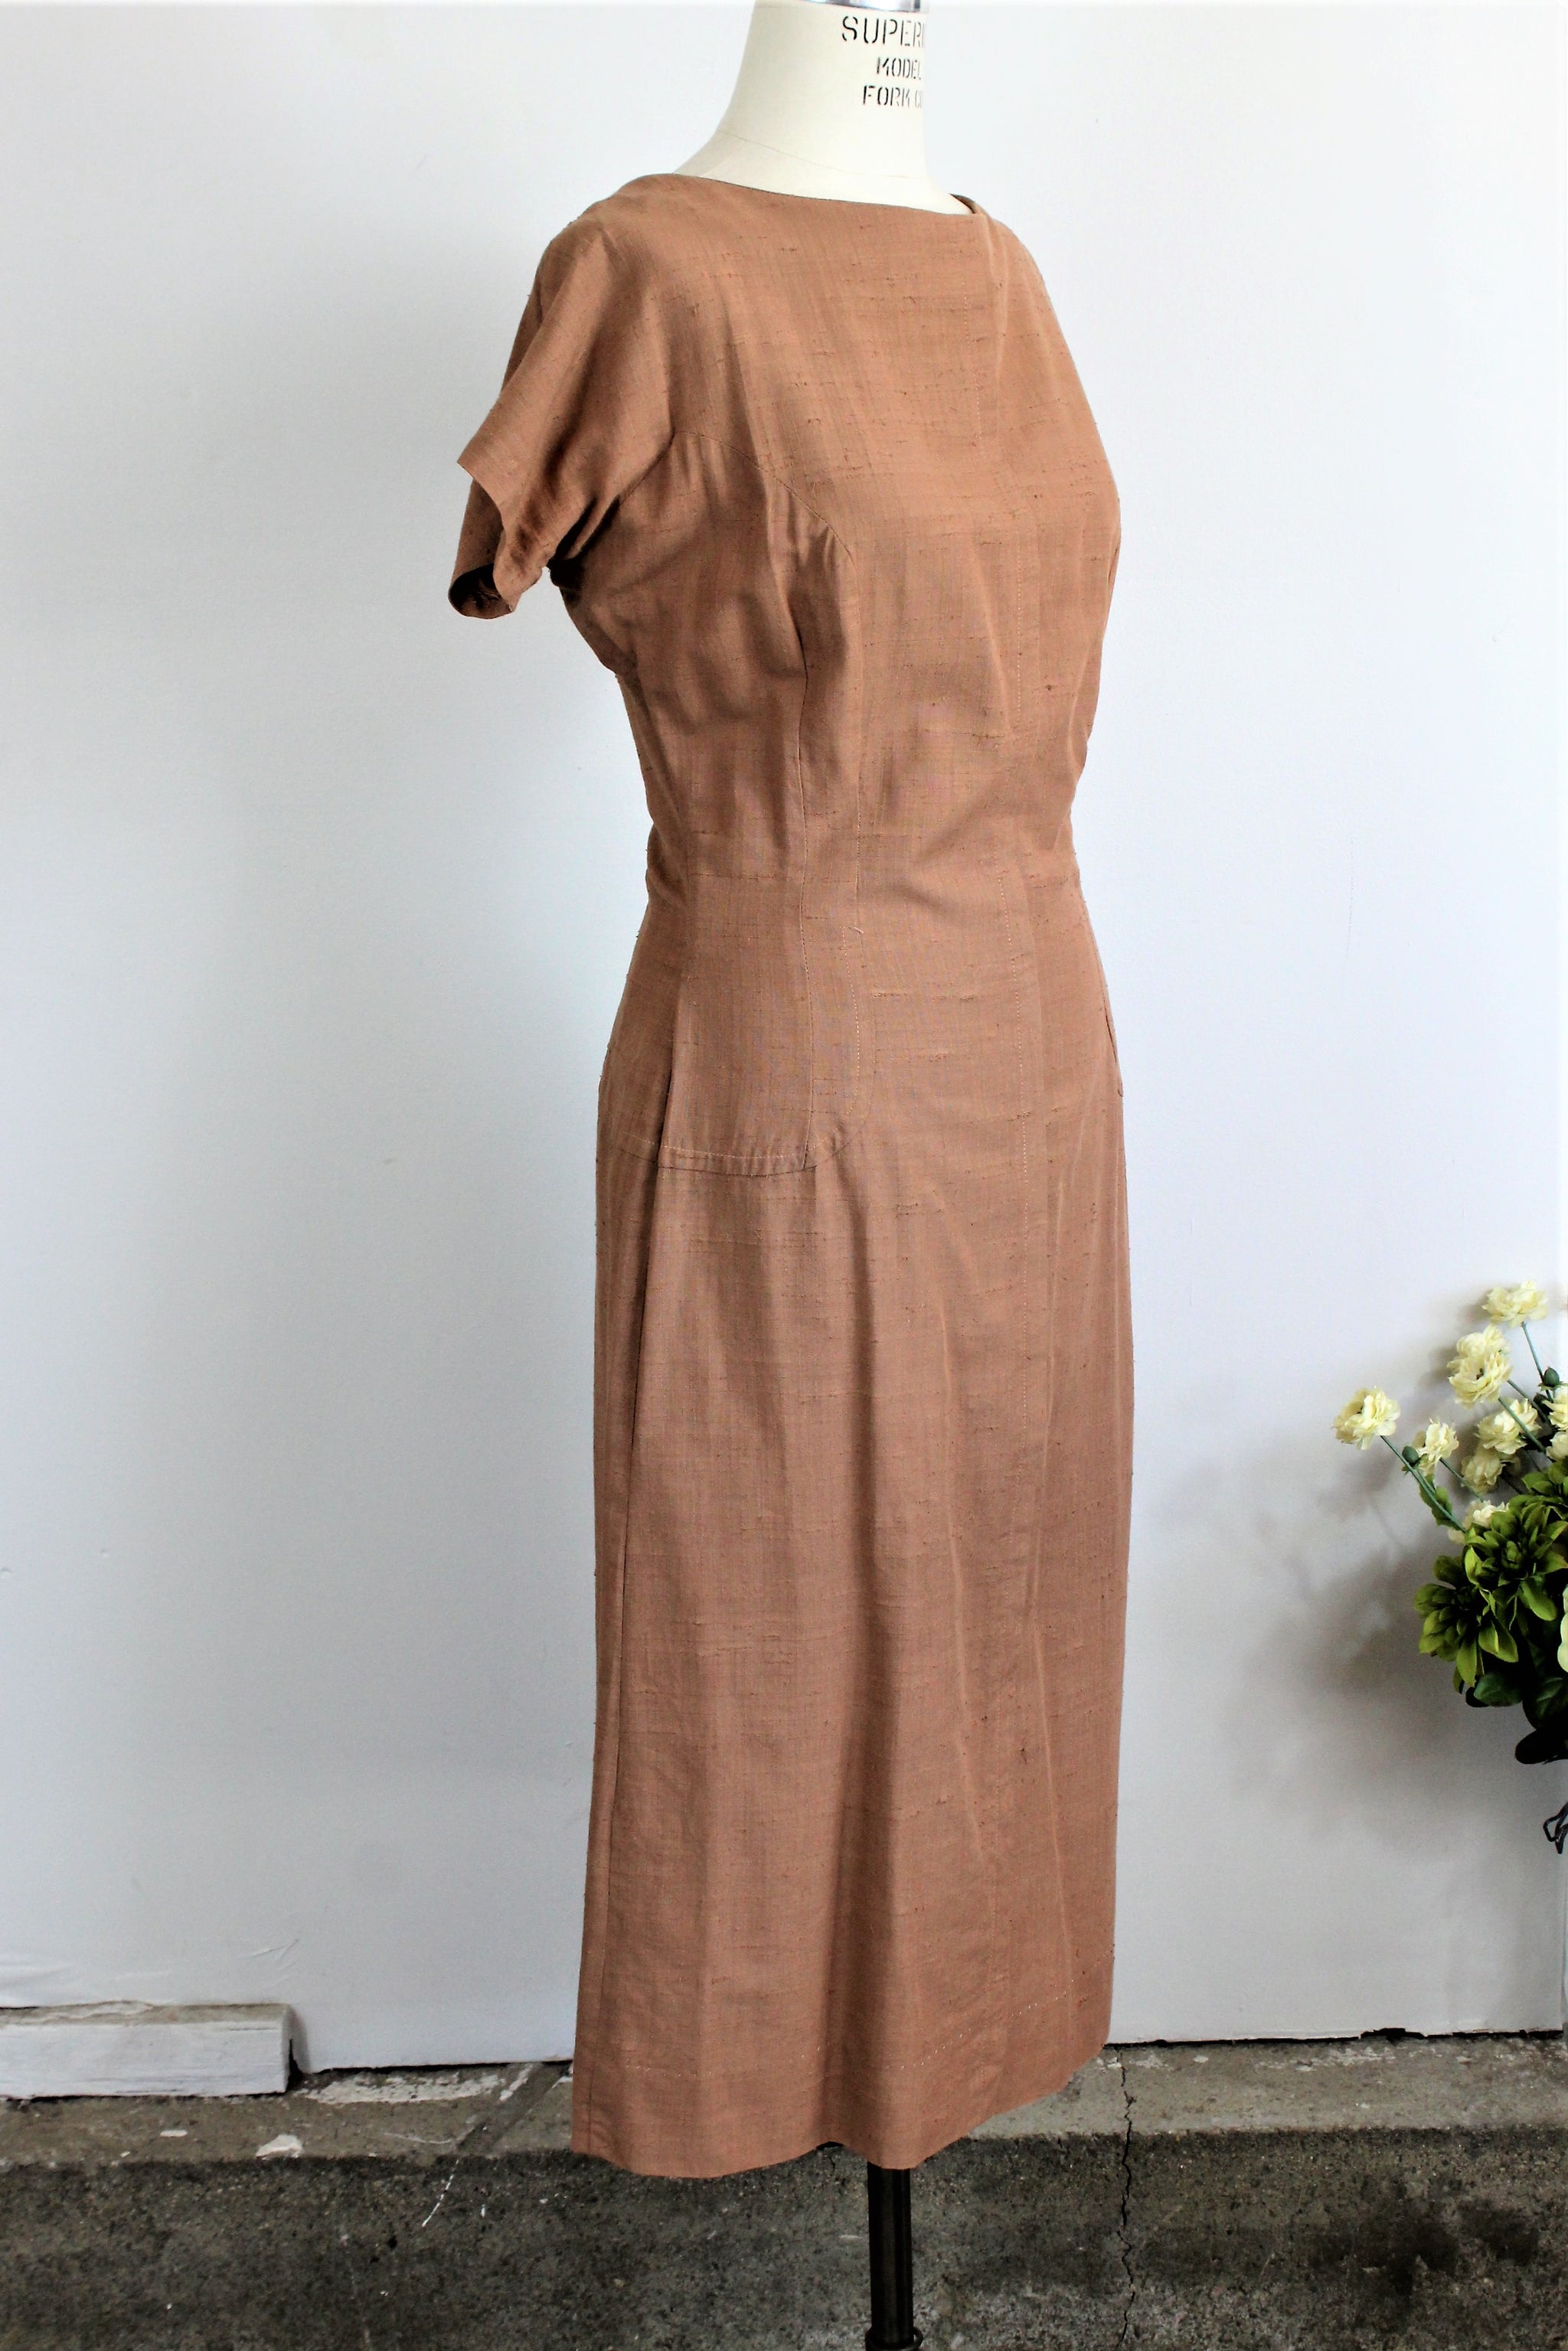 Vintage 1950s Brown Day Dress in Milk Chocolate Brown from Tall Fashio ...